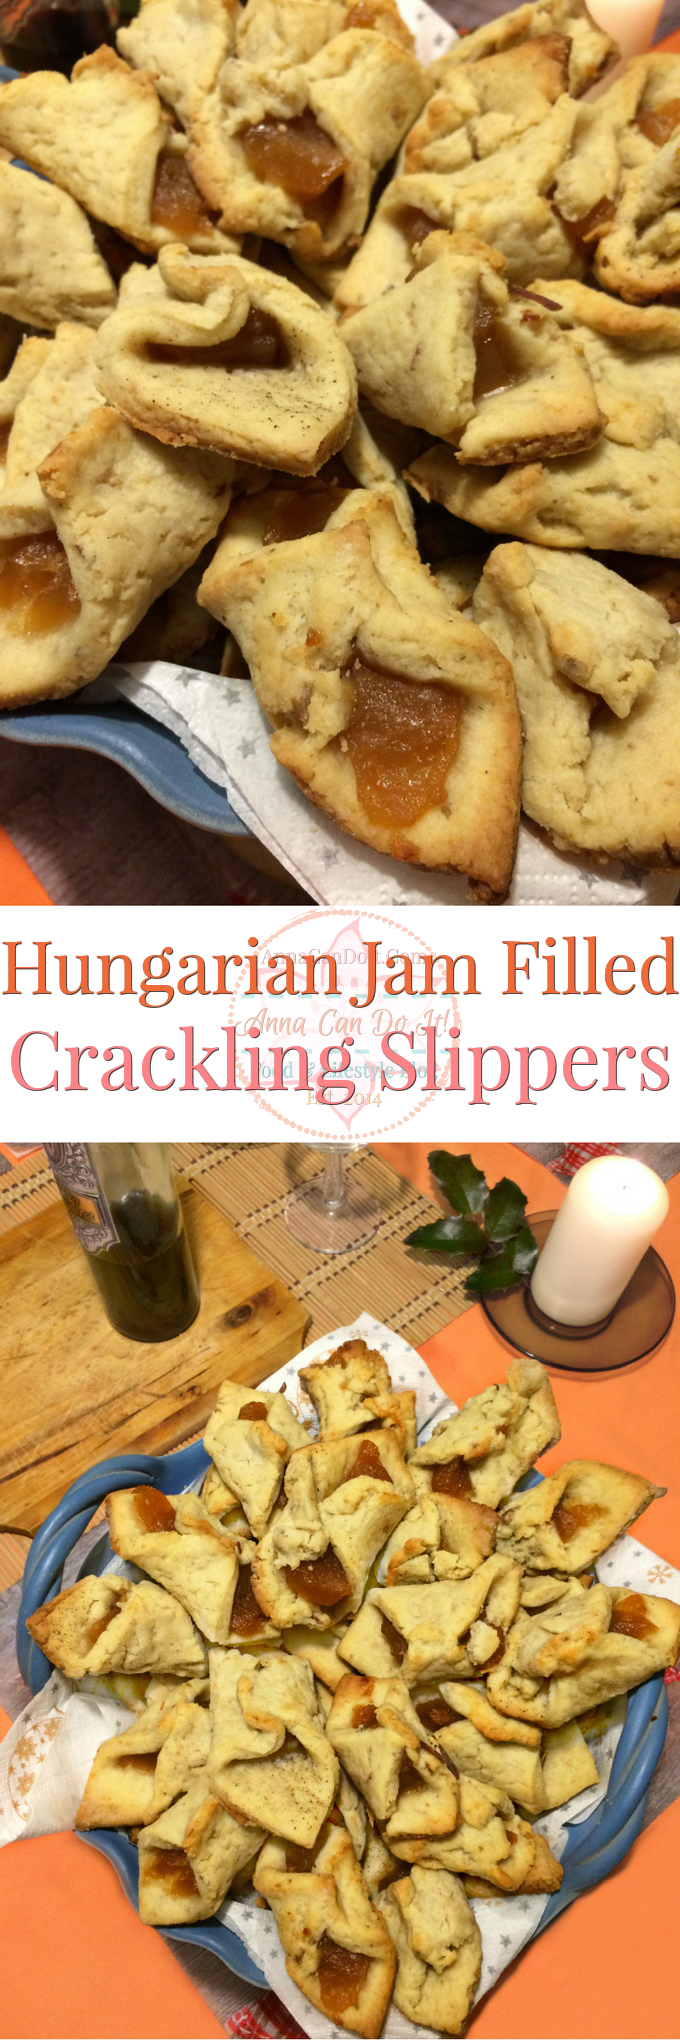 Hungarian Jam Filled Crackling Slippers - Anna Can Do It! - Hungarian Jam Filled Crackling Slippers are divine, friable little biscuits or cookies usually made around Christmas time. Every family has their own recipe and sometimes name for this in here and the countries around us. But one thing we have in common, these are taste wonderful for sure!